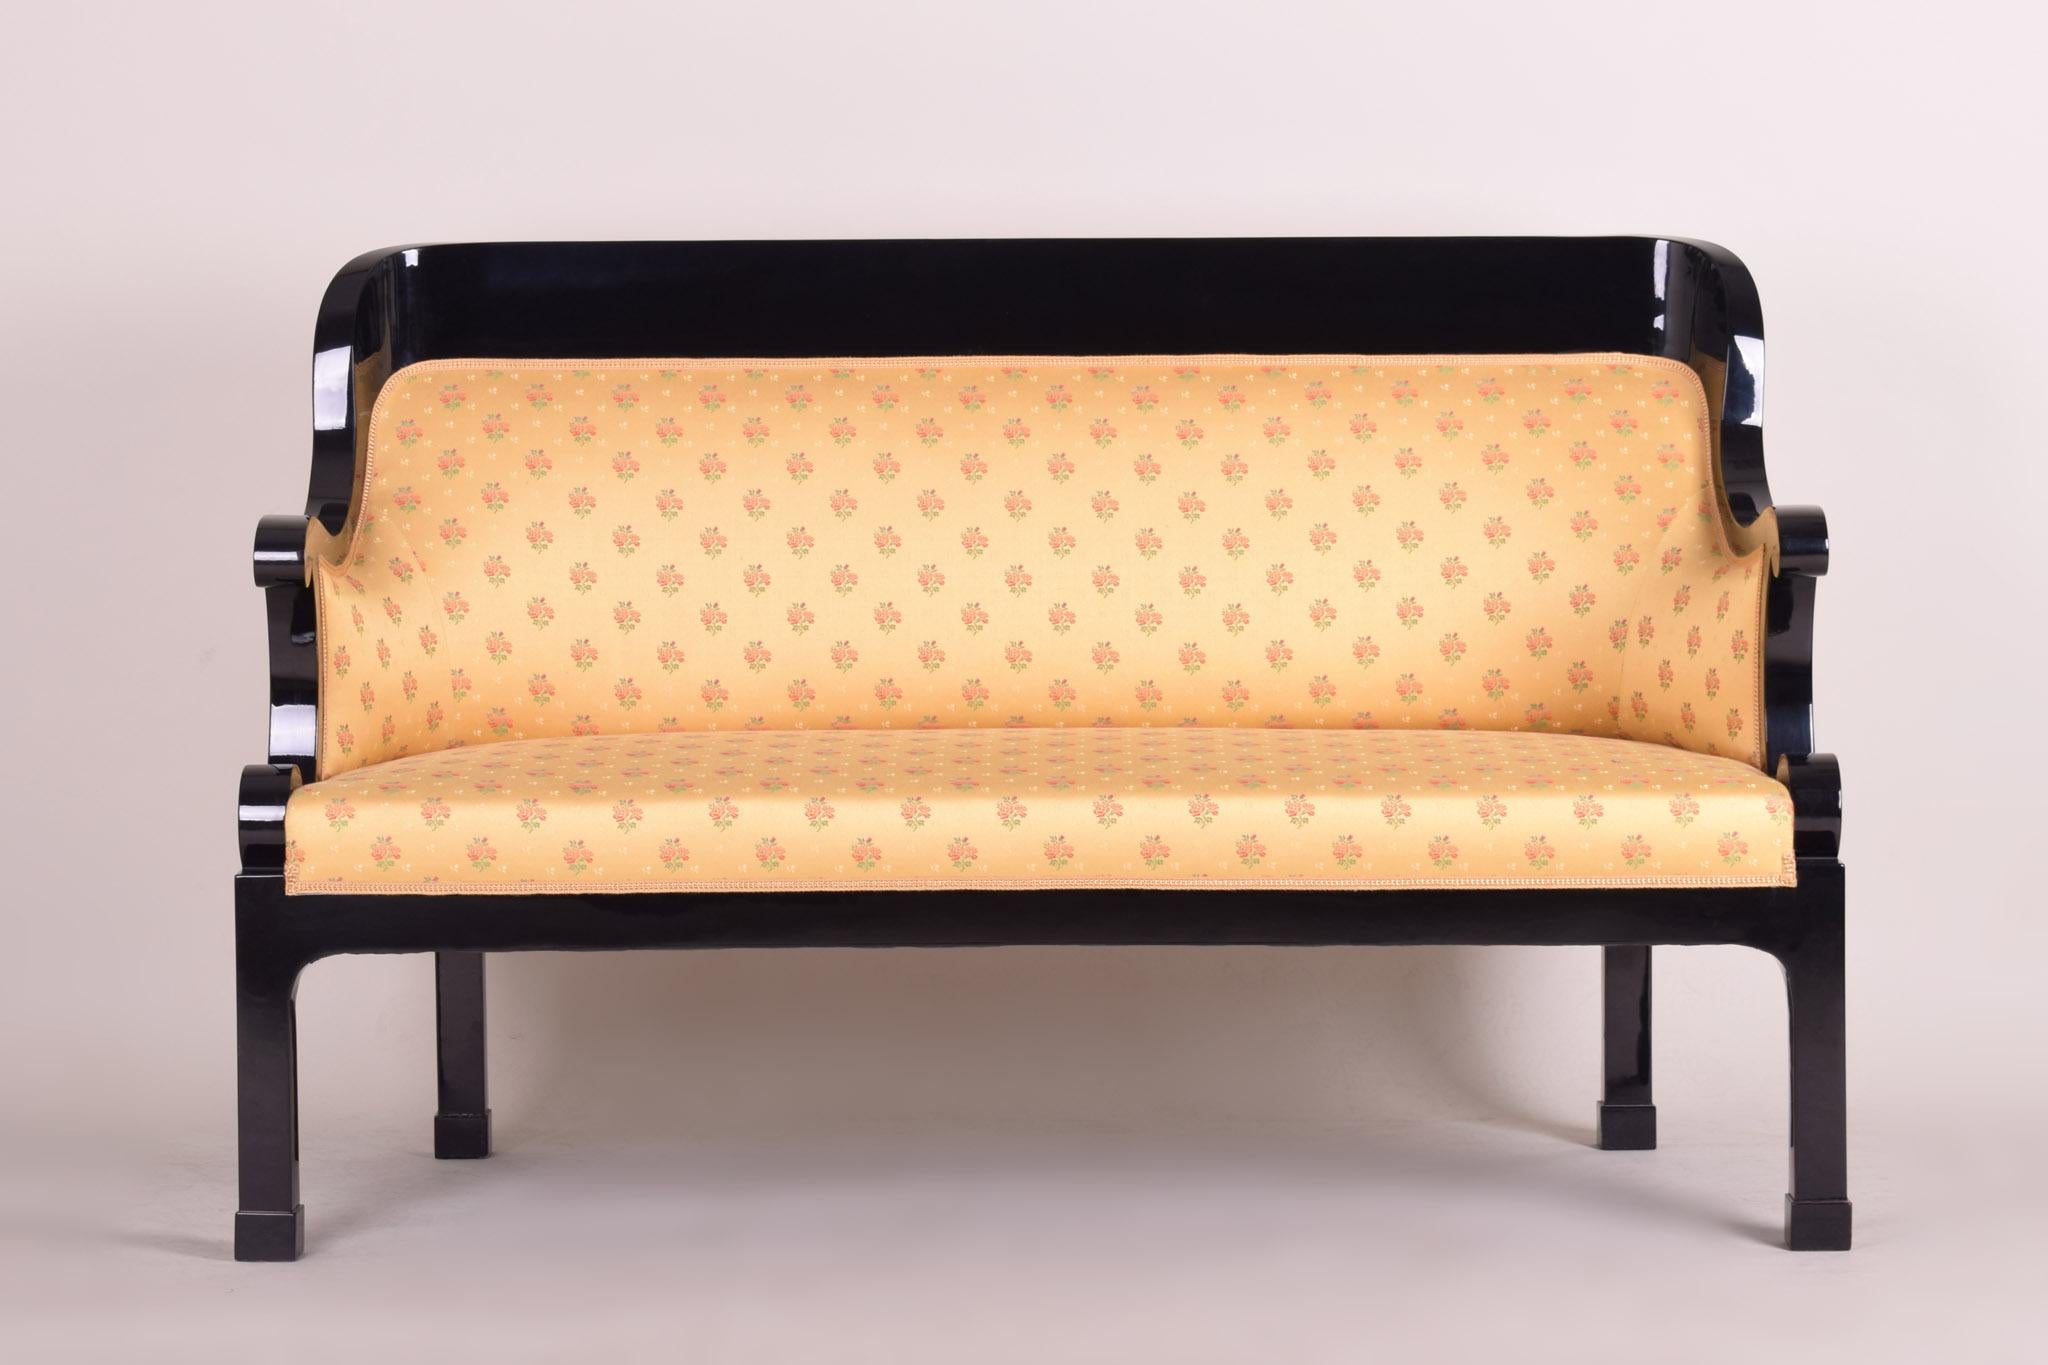 Biedermeier sofa
Completely restored, new upholstery included. Black lacquer. High gloss.